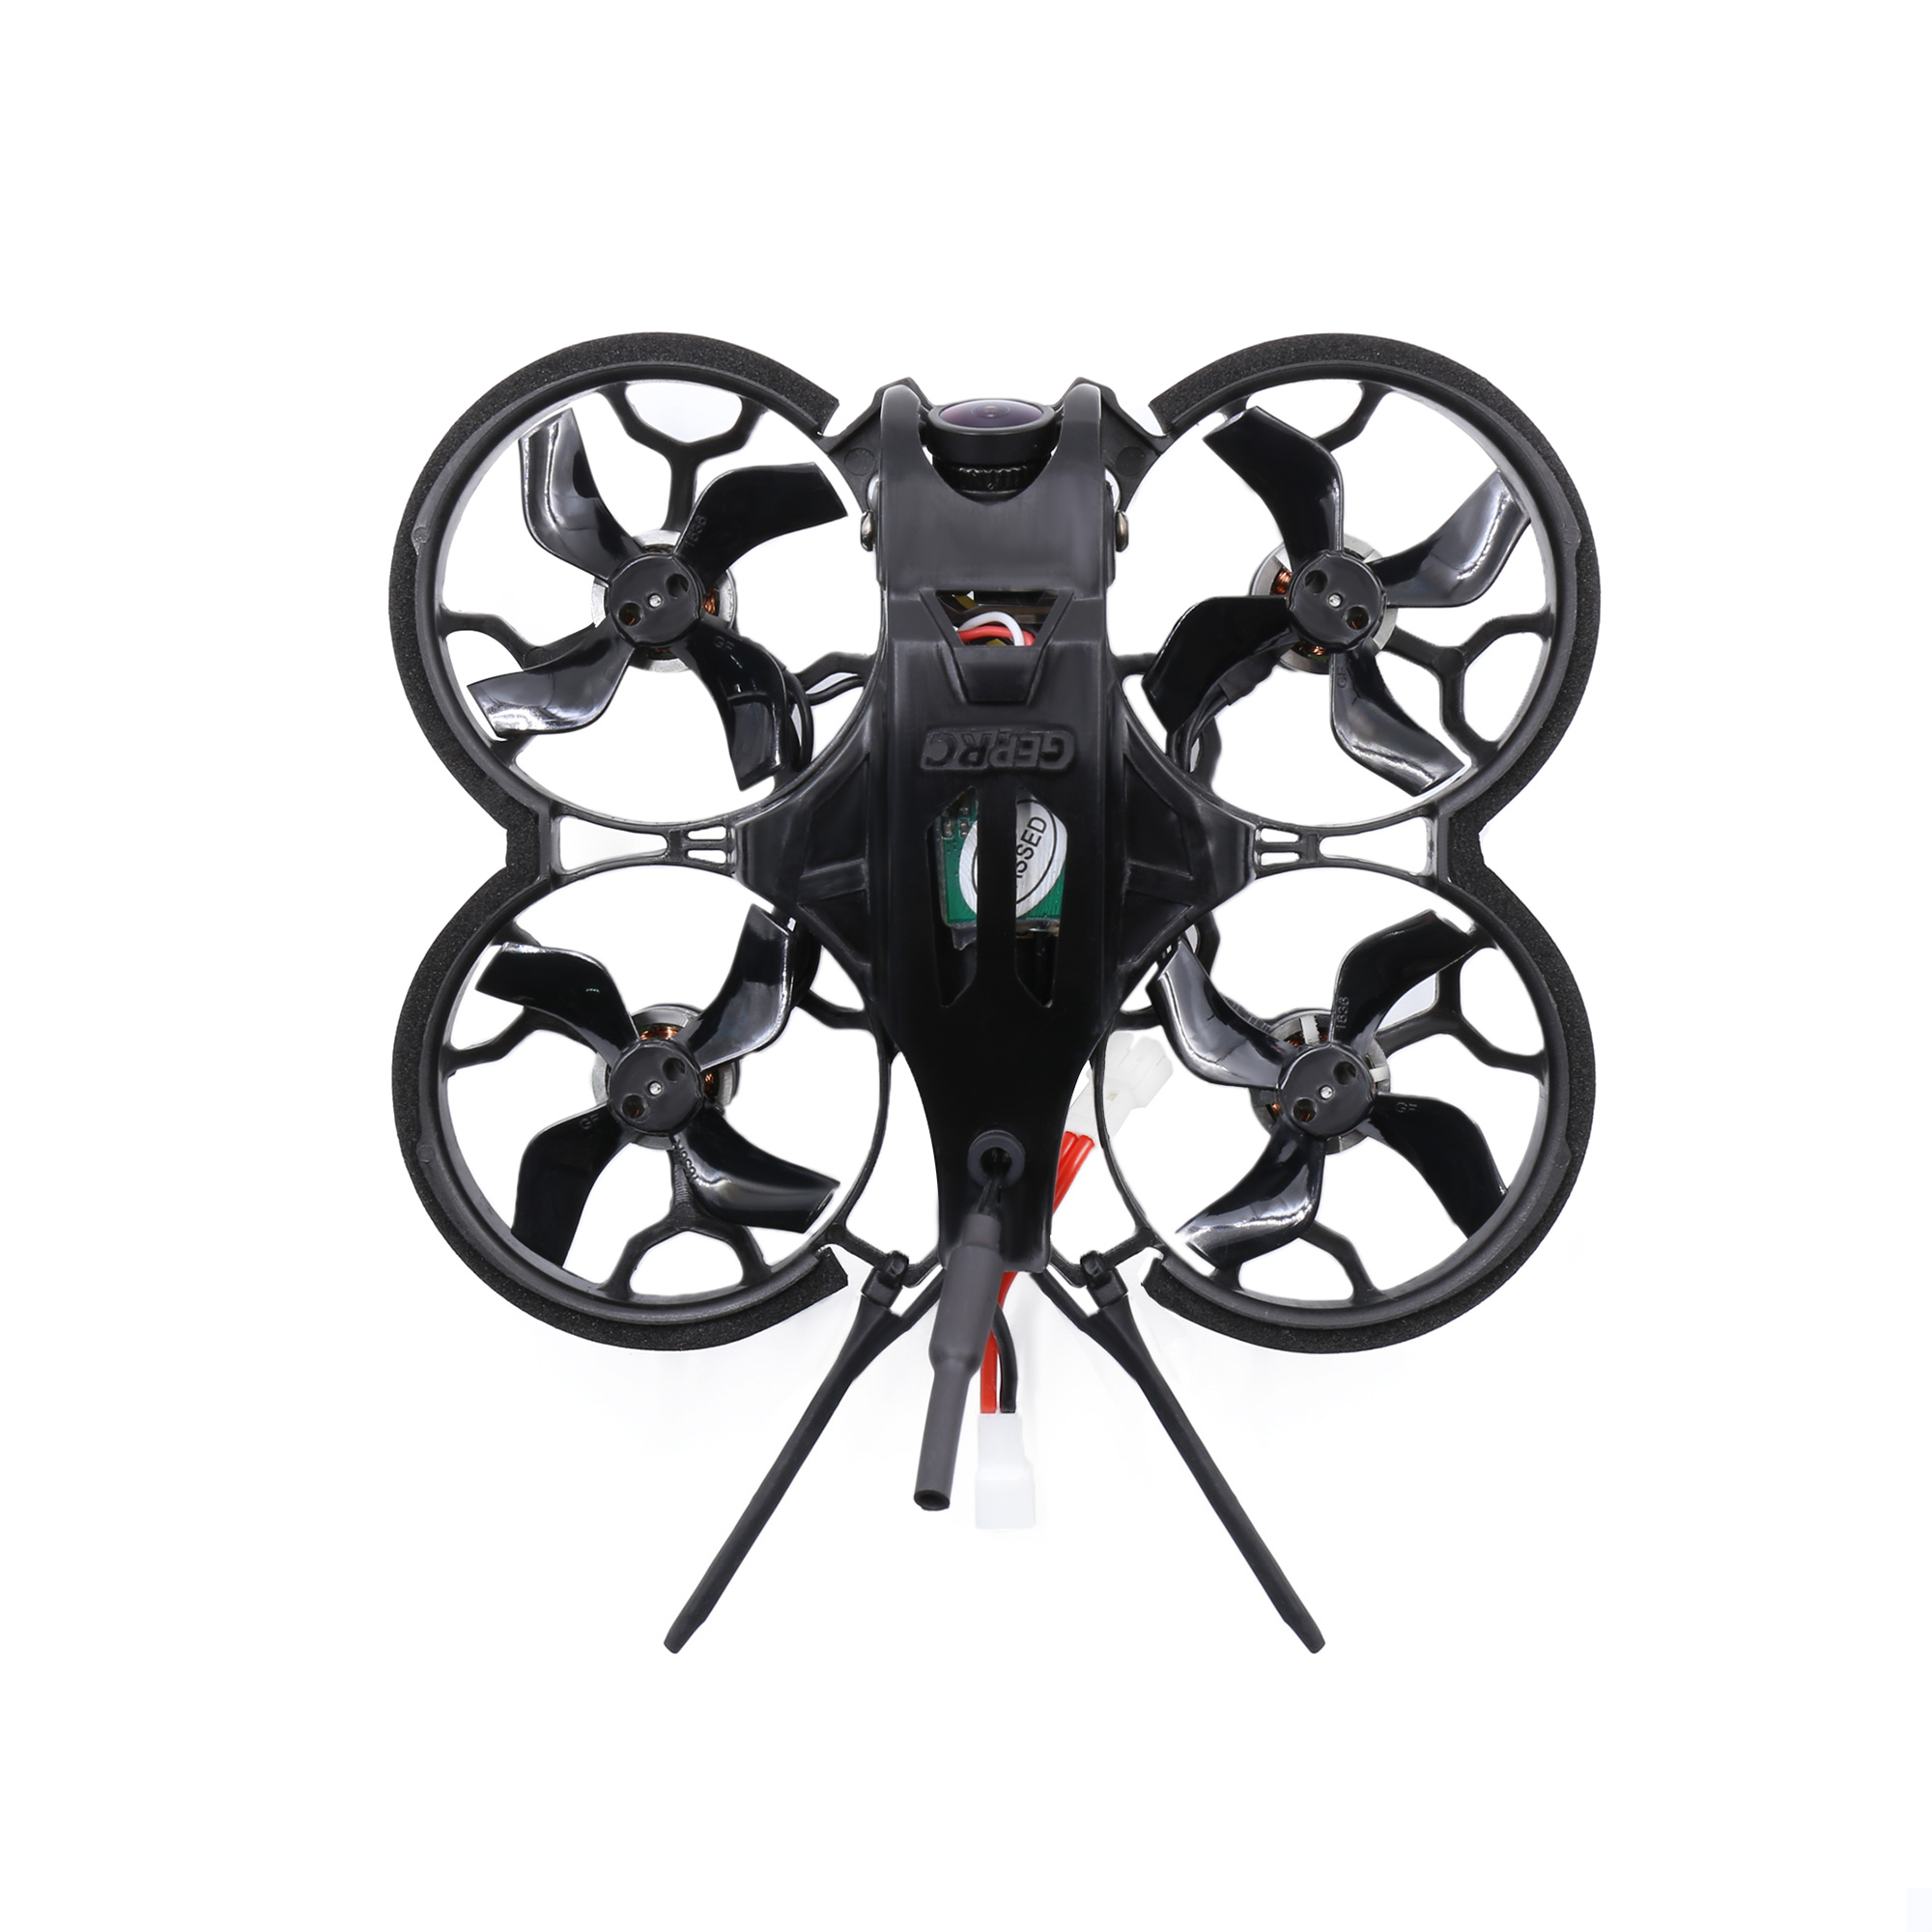 GEPRC-TinyGO-16inch-2S-FPV-Indoor-Whoop-Runcam-Nano2-GR8-Remote-ControllerRG1-Goggles-RTF-Ready-To-F-1788771-9